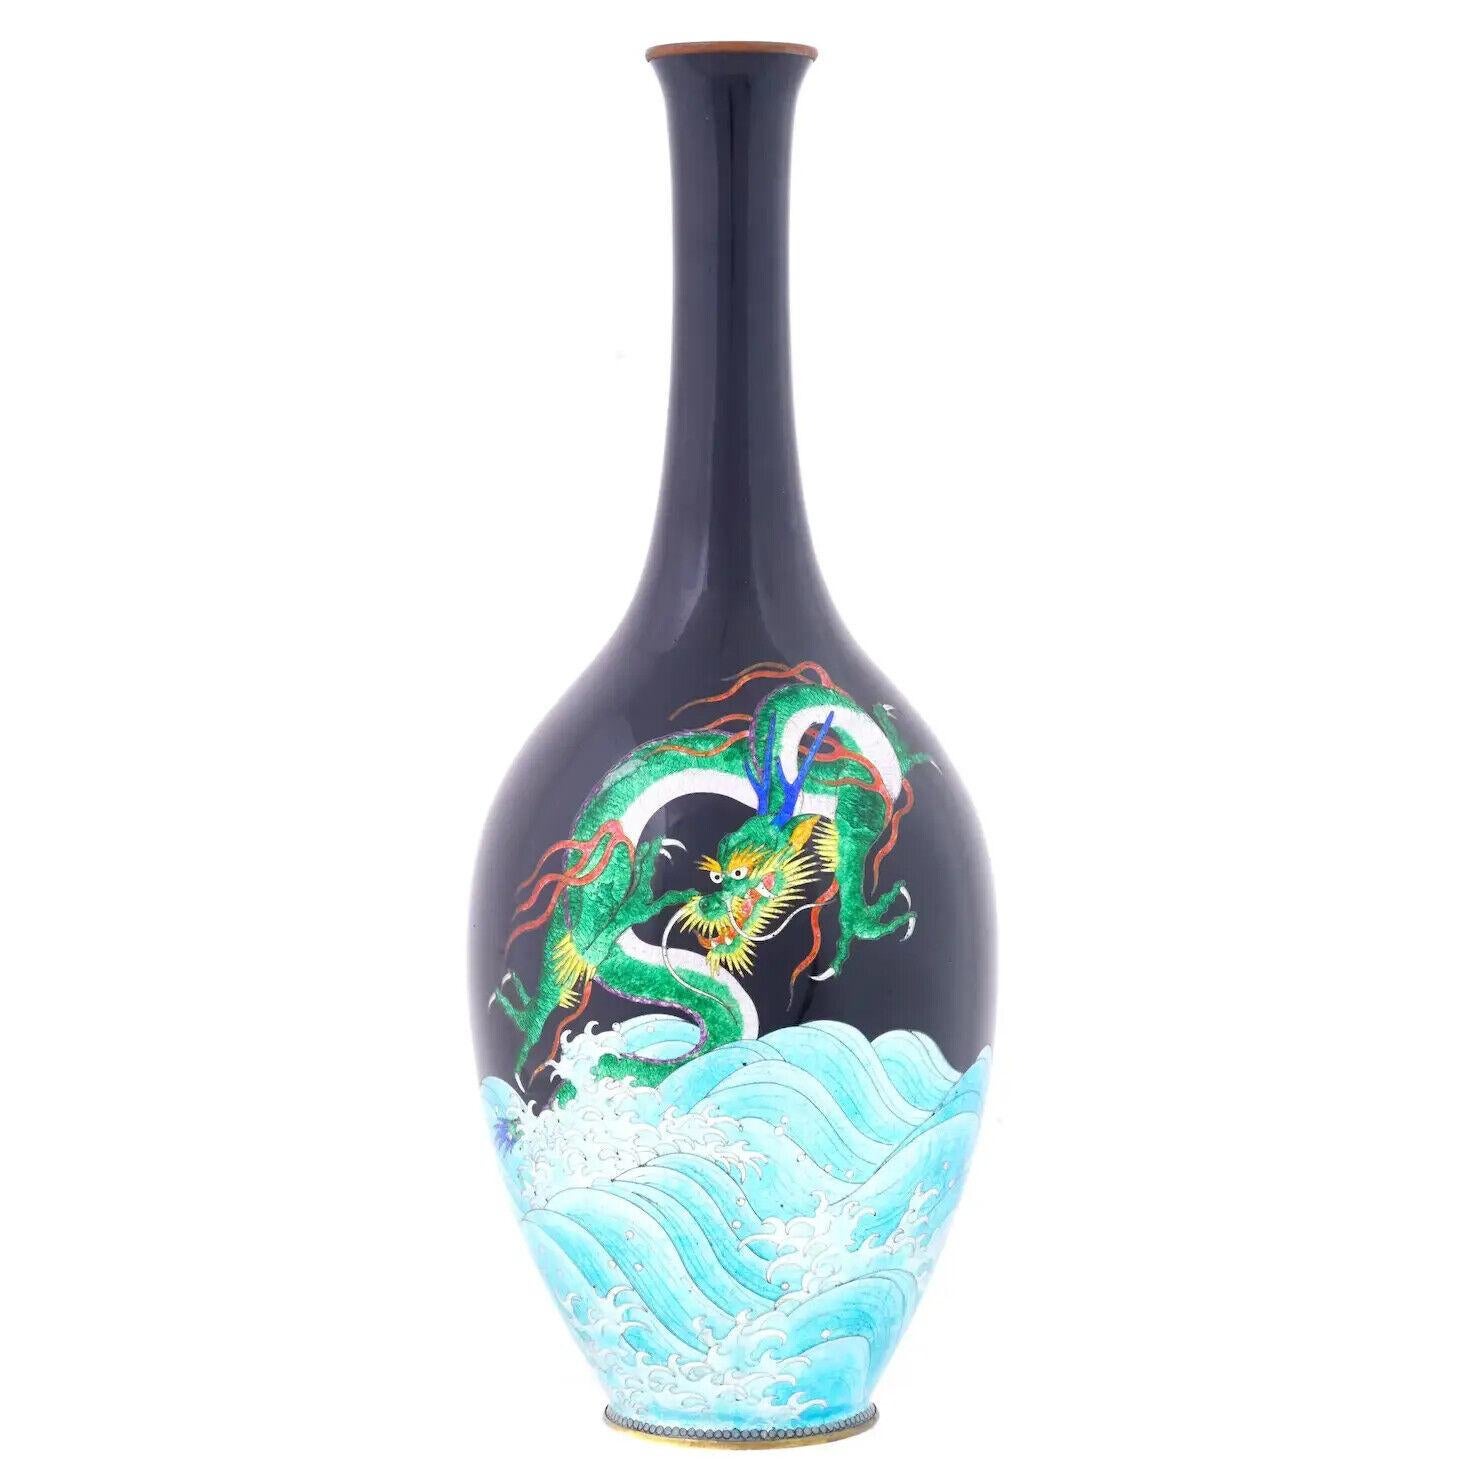 A high quality Japanese enamel vase, Meiji era, 1868 to 1912. The vase has an amphora shaped body and a narrow neck. The ware is enameled with a polychrome image of a big dragon over the sea made in the Cloisonne technique. Antique and Vintage Asian